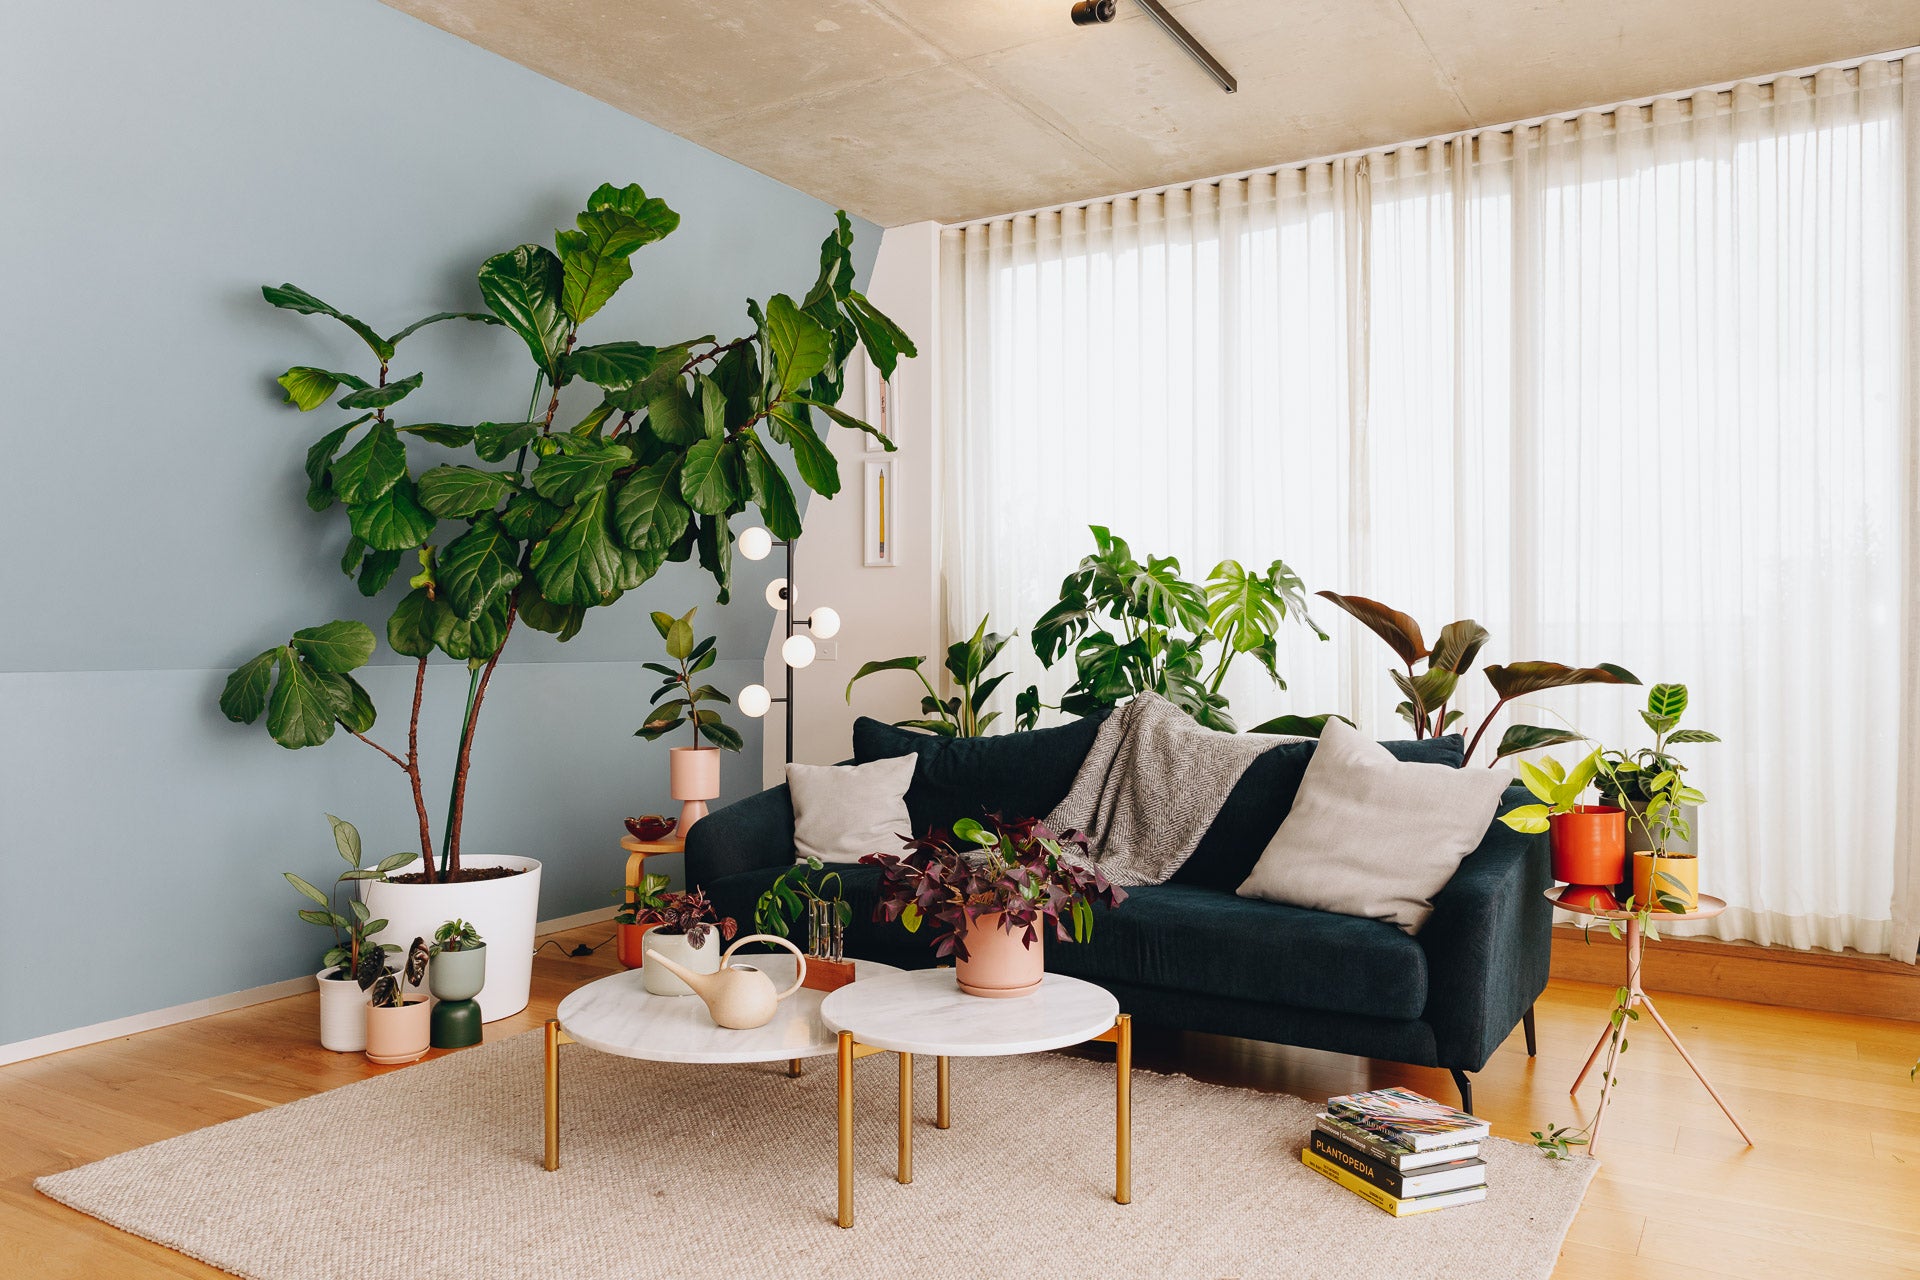 12 Indoor House Plants You Probably Won’t Kill